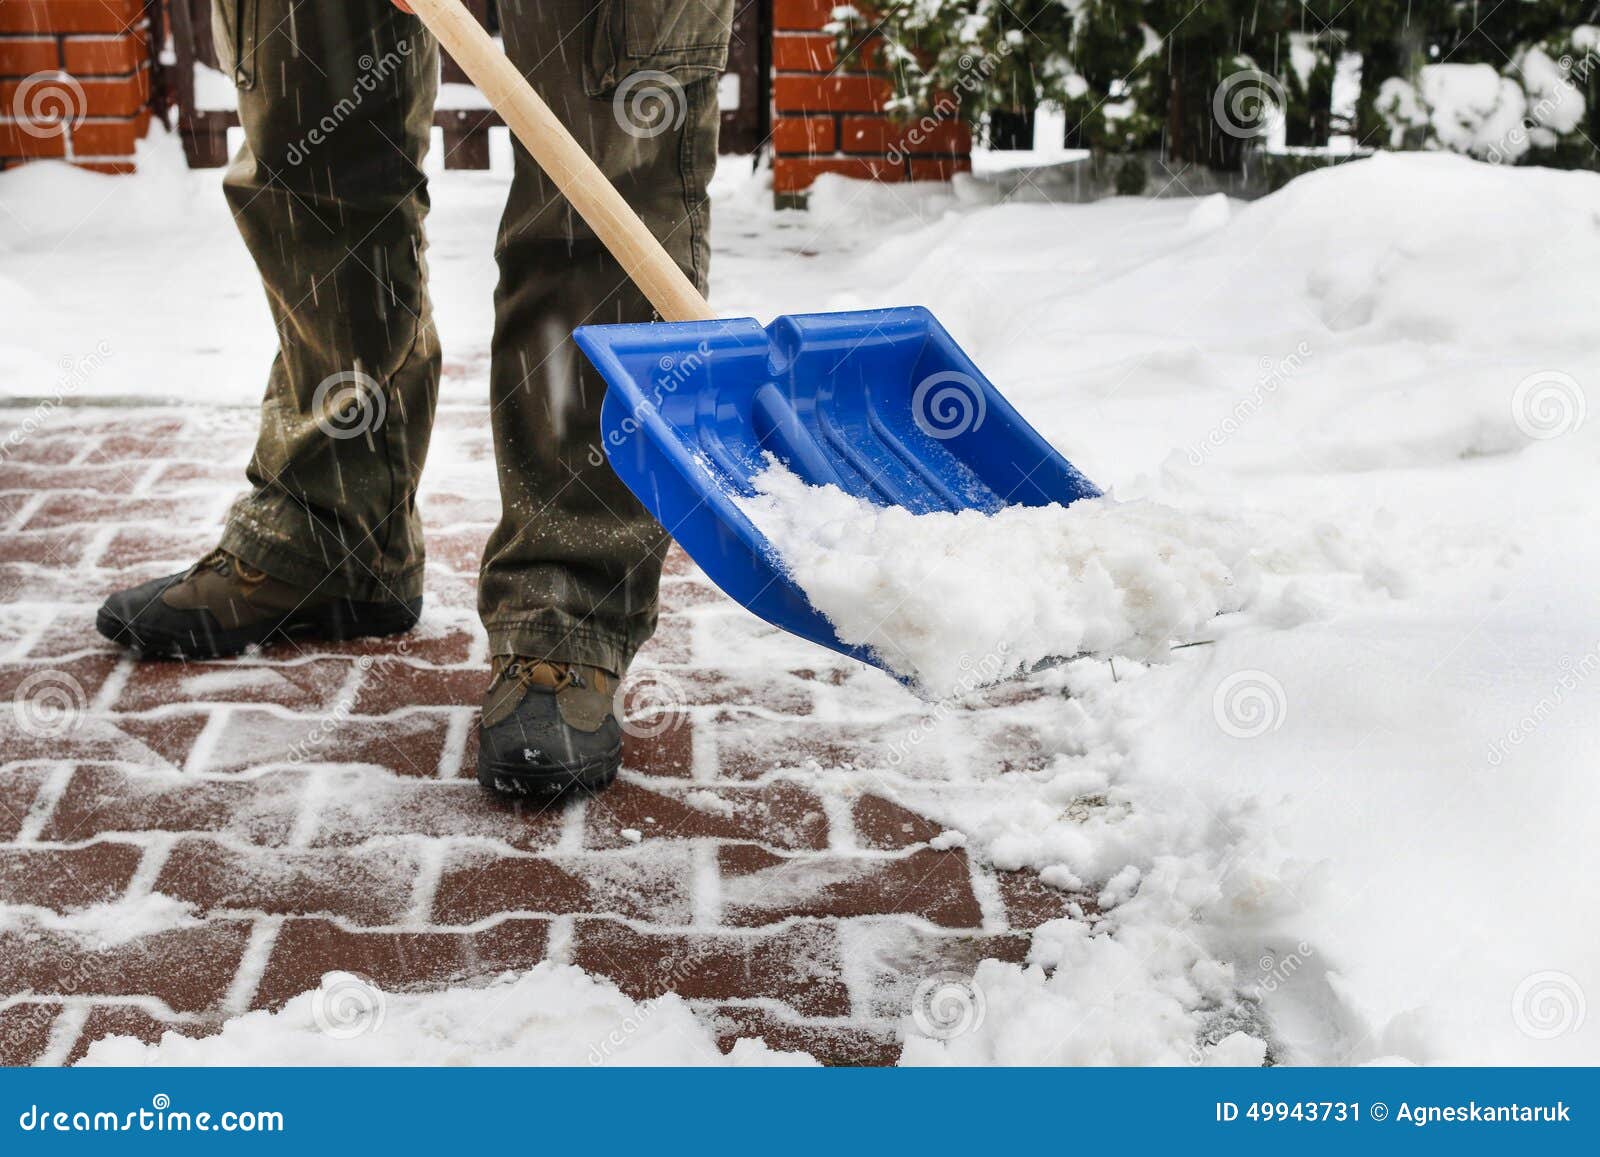 man removing snow from the sidewalk after snowstorm